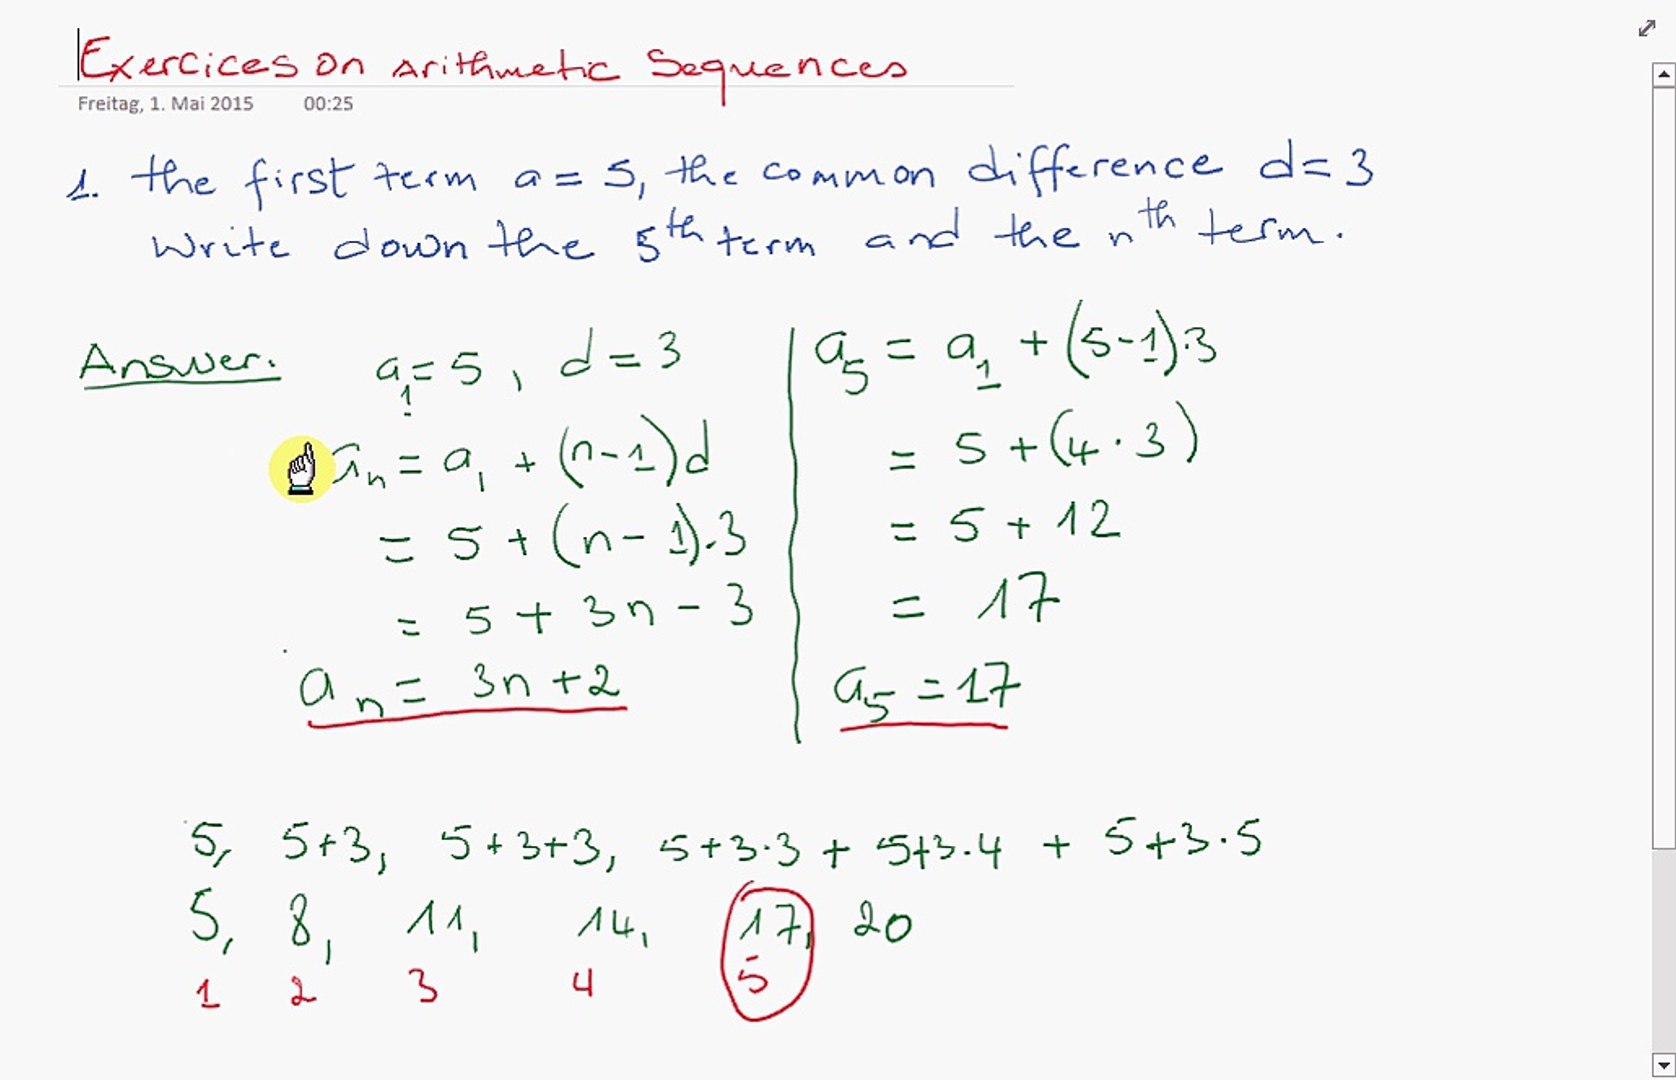 Simple Ex. on finding the 26th and nth numbers of an Arithmetic Sequence